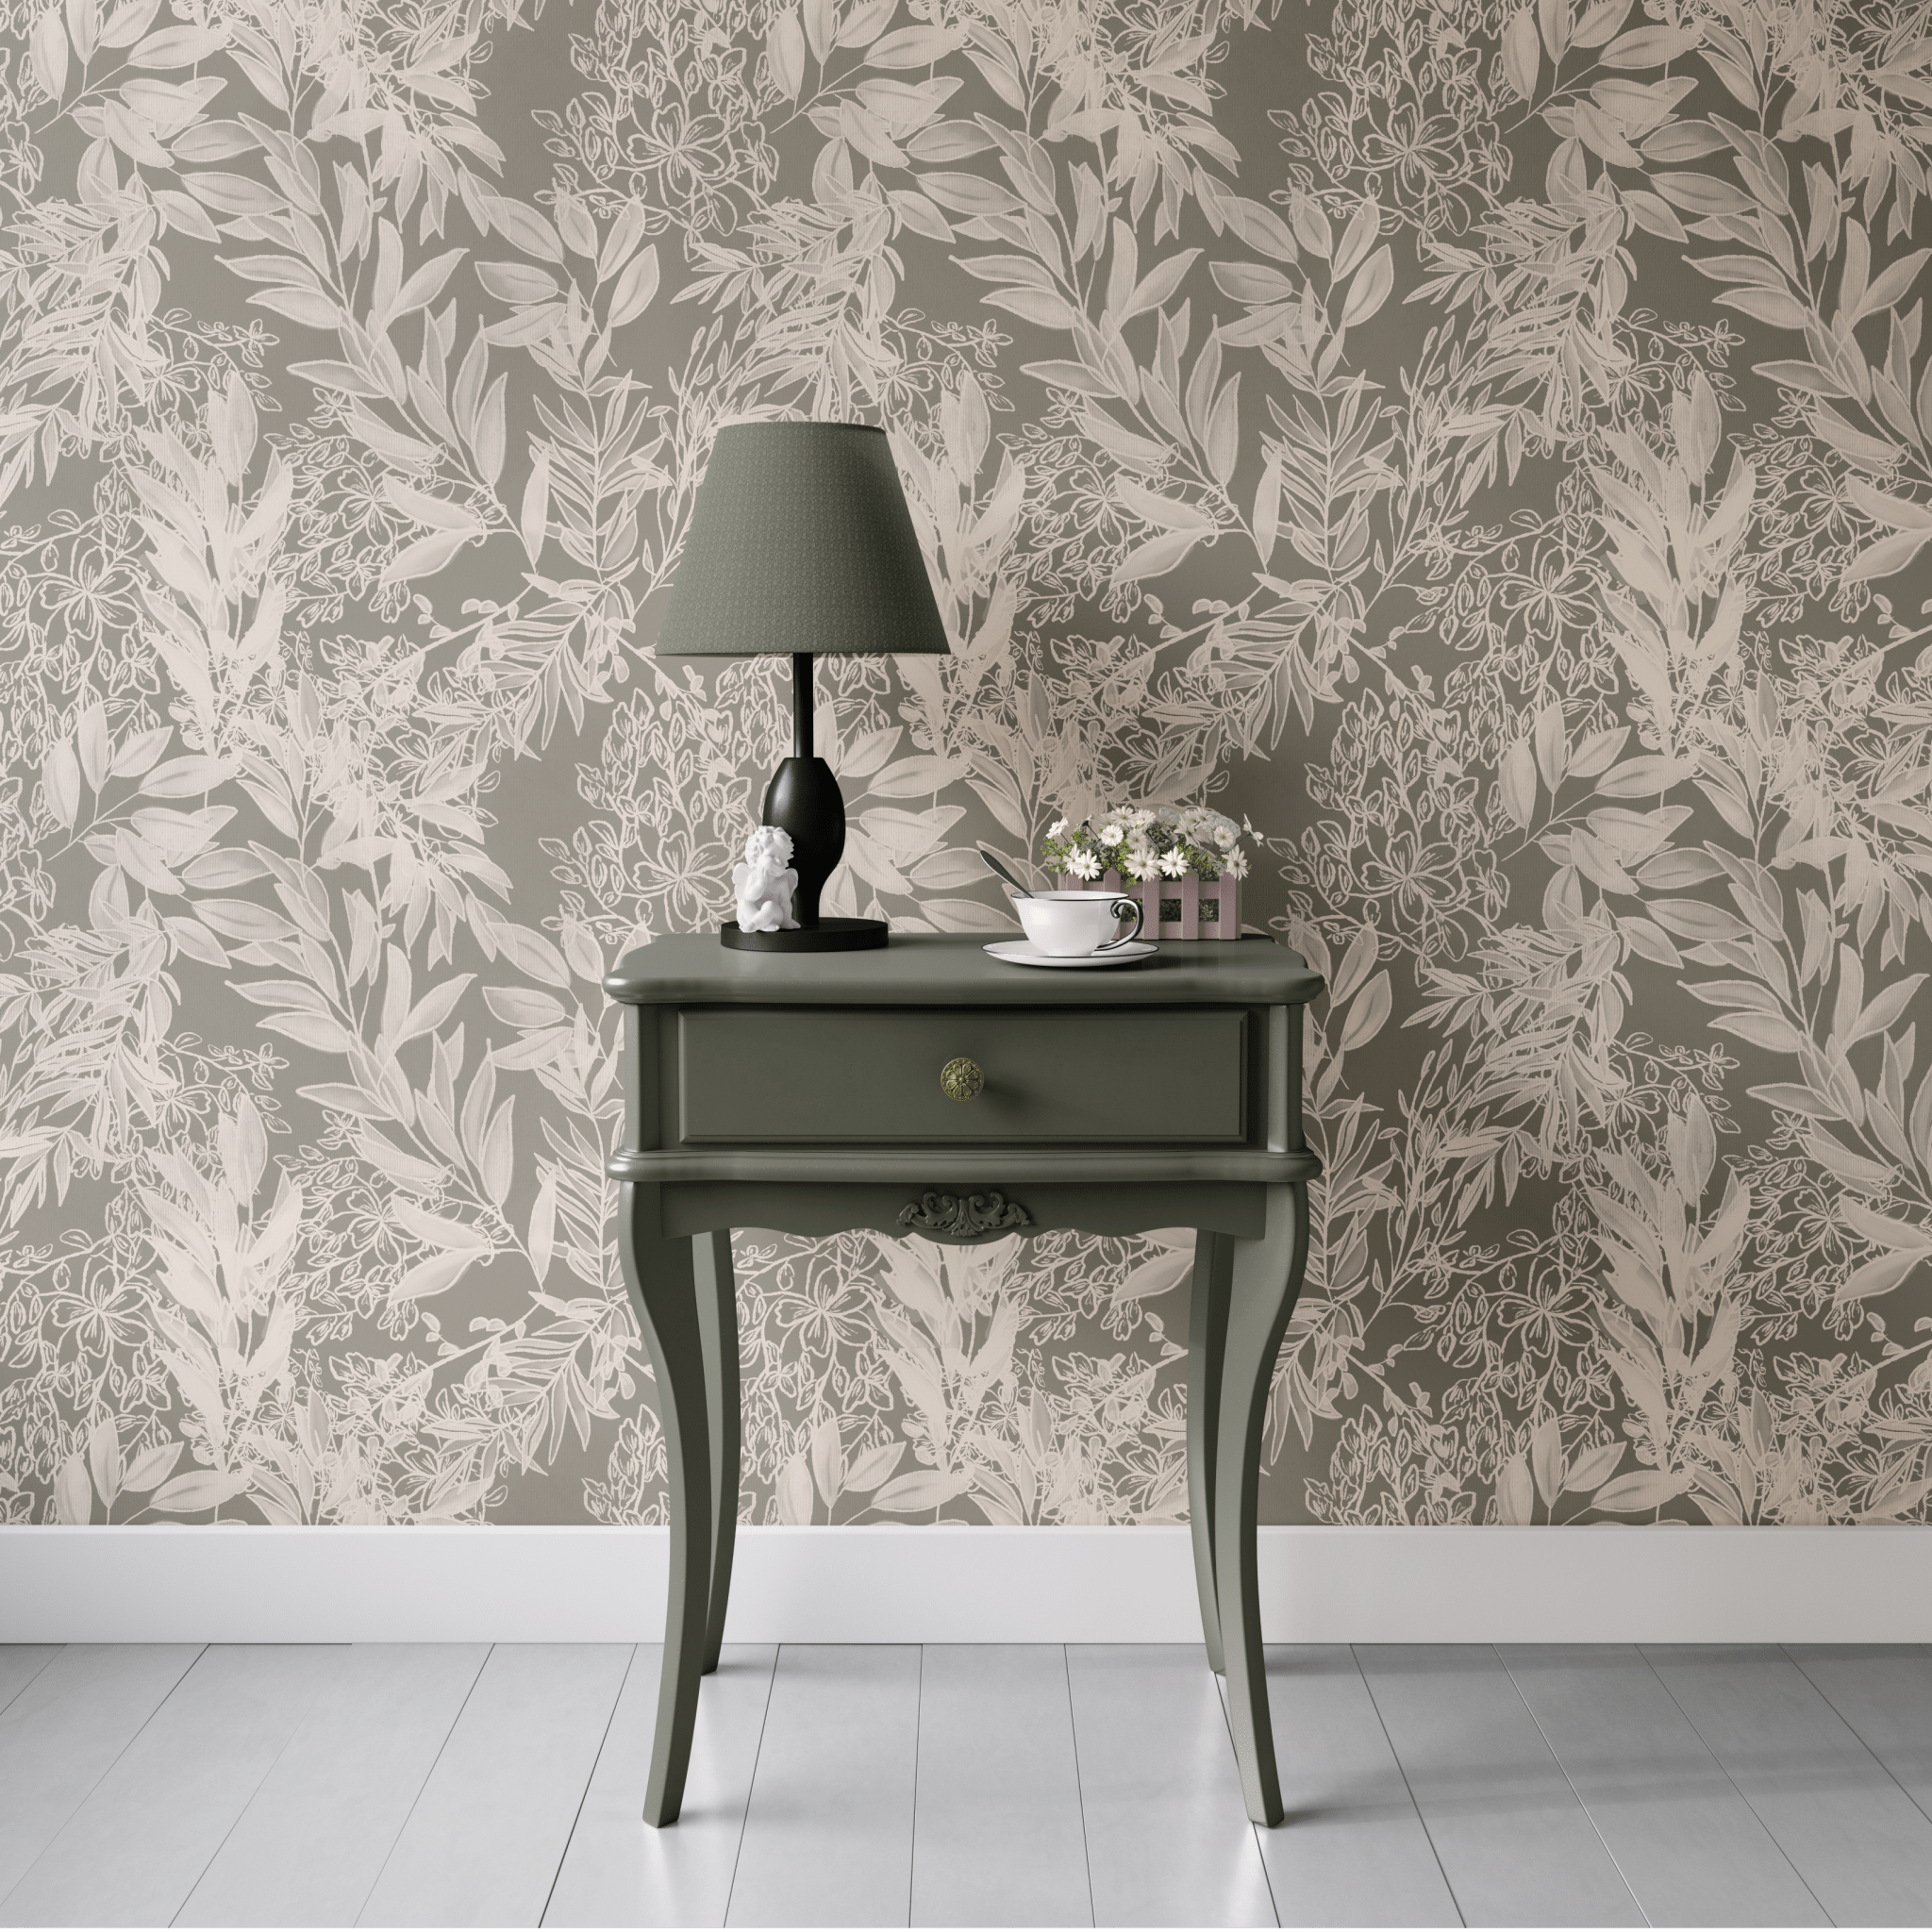 This image features a room with a leaf-patterned wallpaper in neutral cream and gray tones. There is an olive green side table with a lower shelf and a single drawer, detailed with a vintage gold knob. 